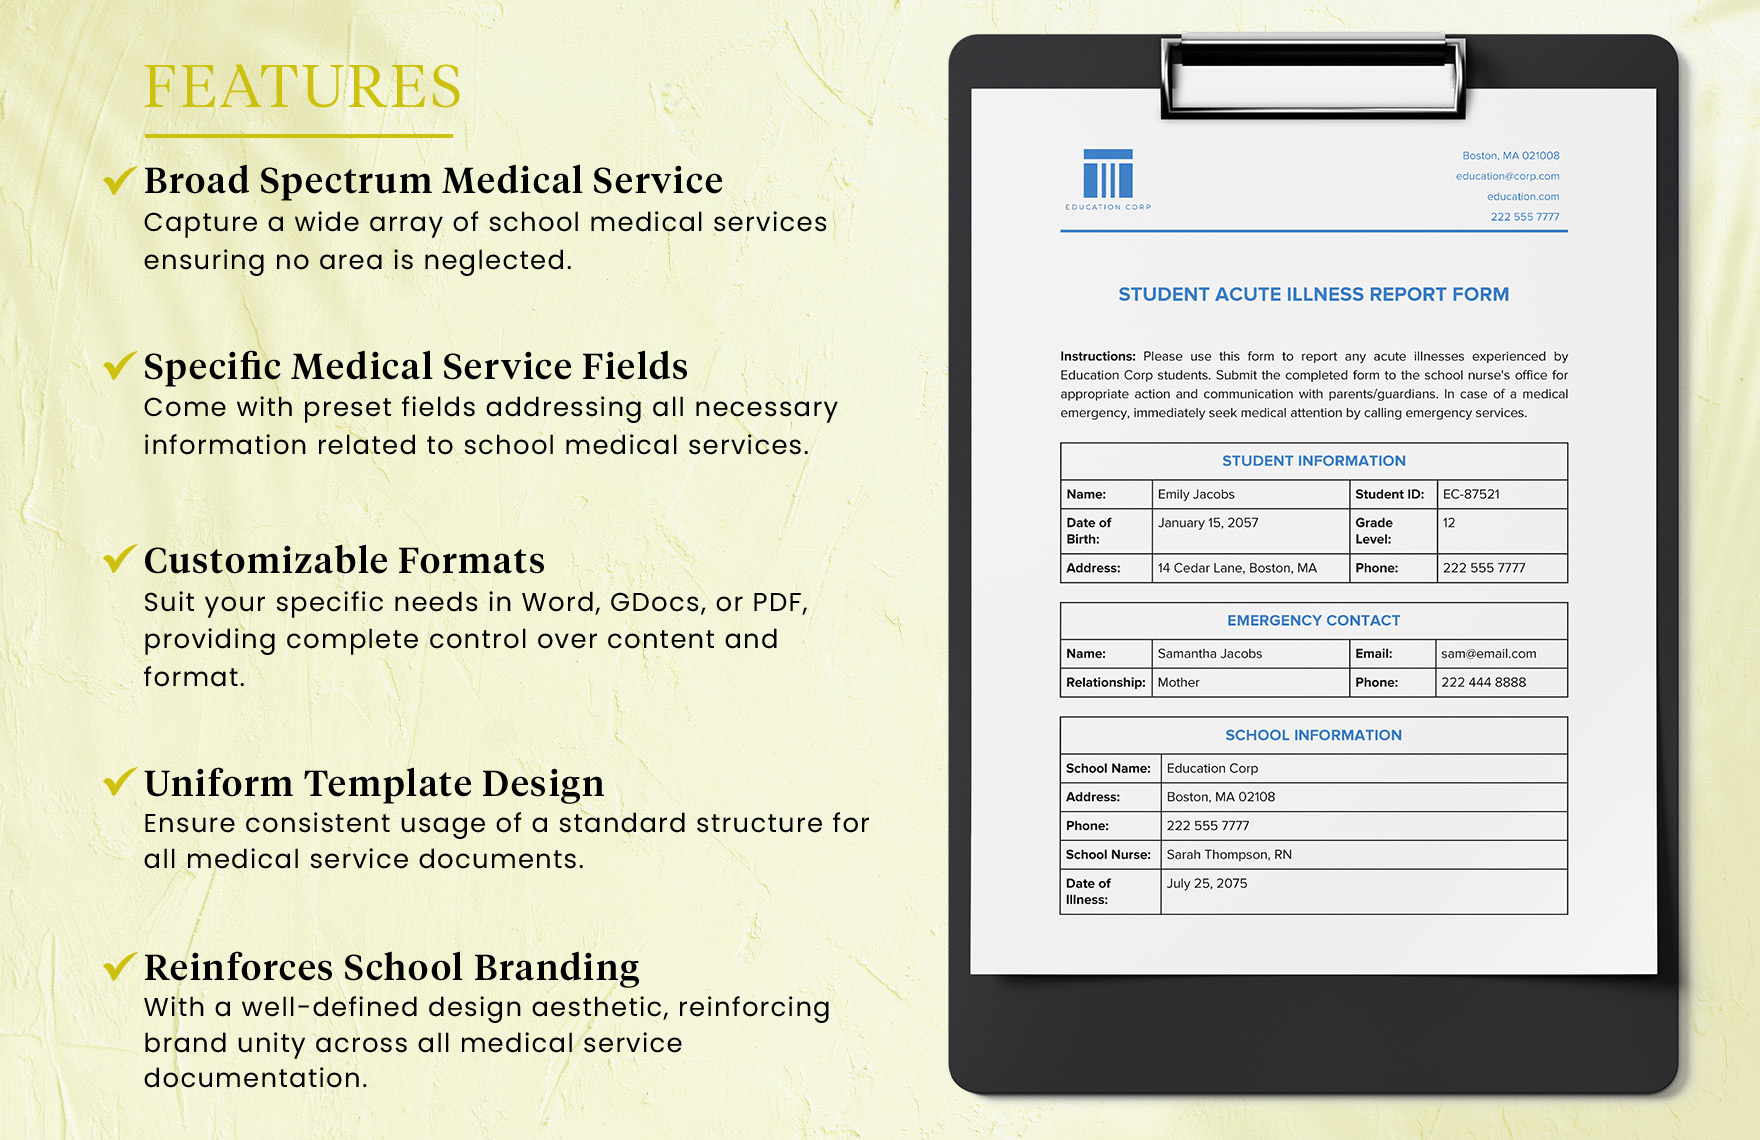 Student Acute Illness Report Form Template